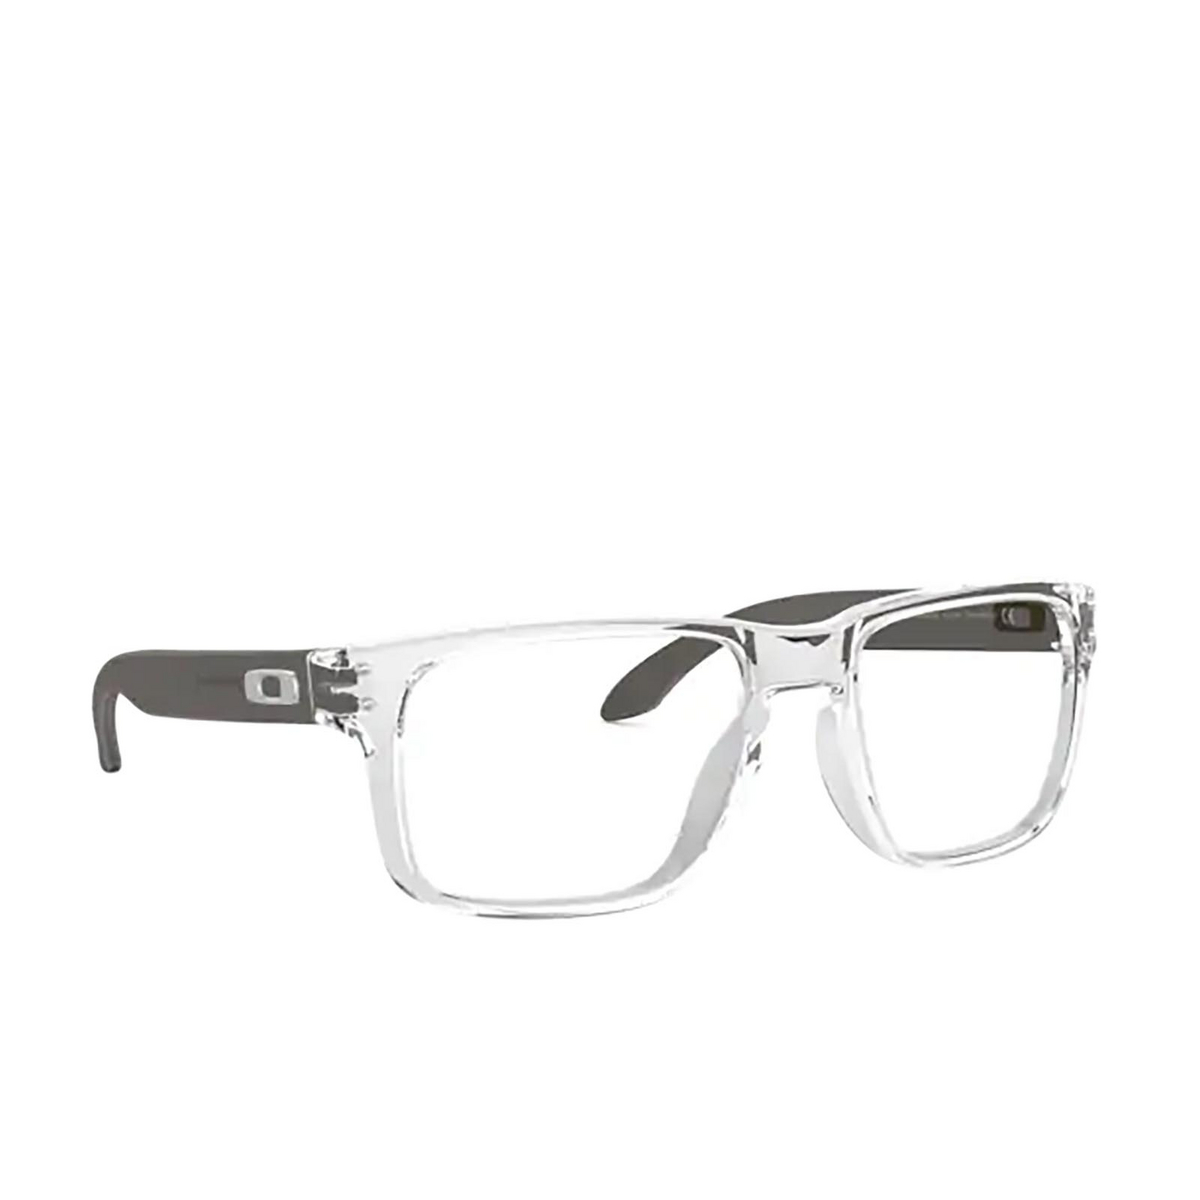 Oakley HOLBROOK RX Eyeglasses 815603 POLISHED CLEAR - three-quarters view